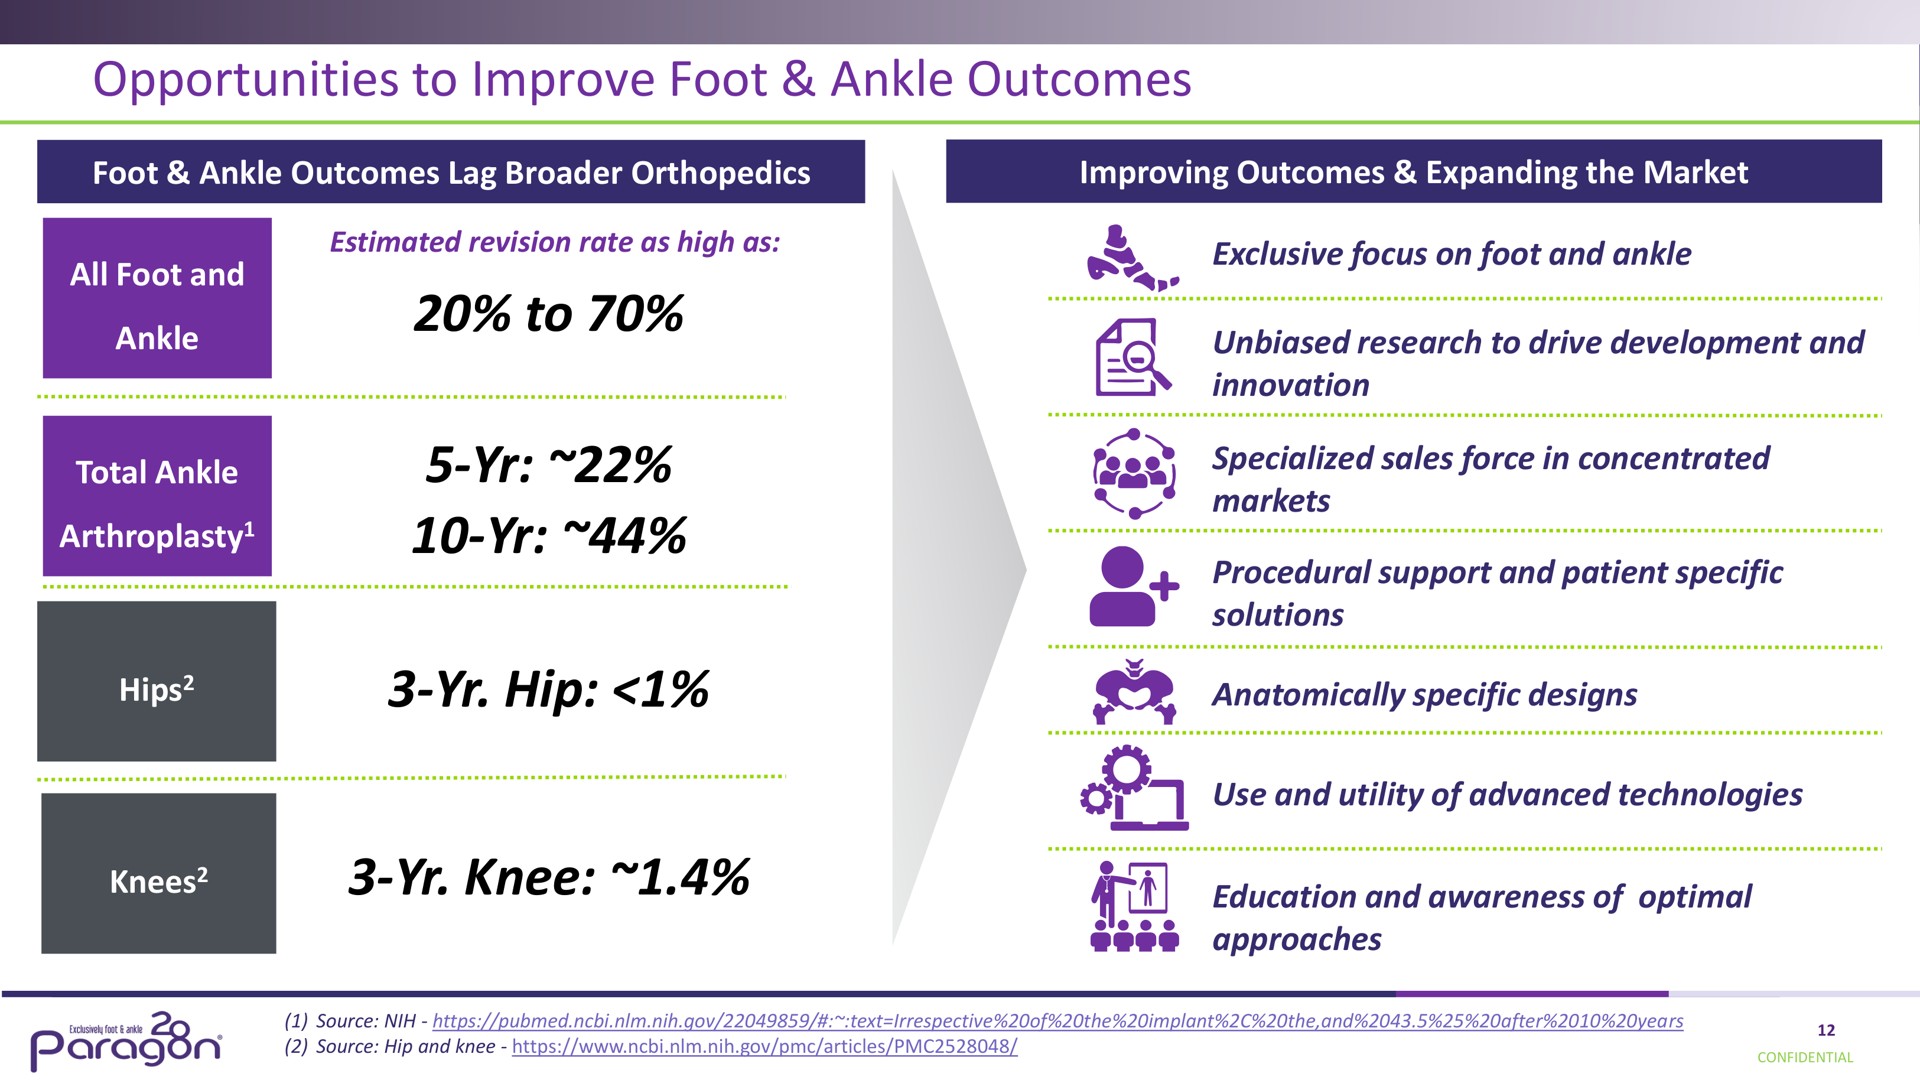 opportunities to improve foot ankle outcomes to hip knee | Paragon28